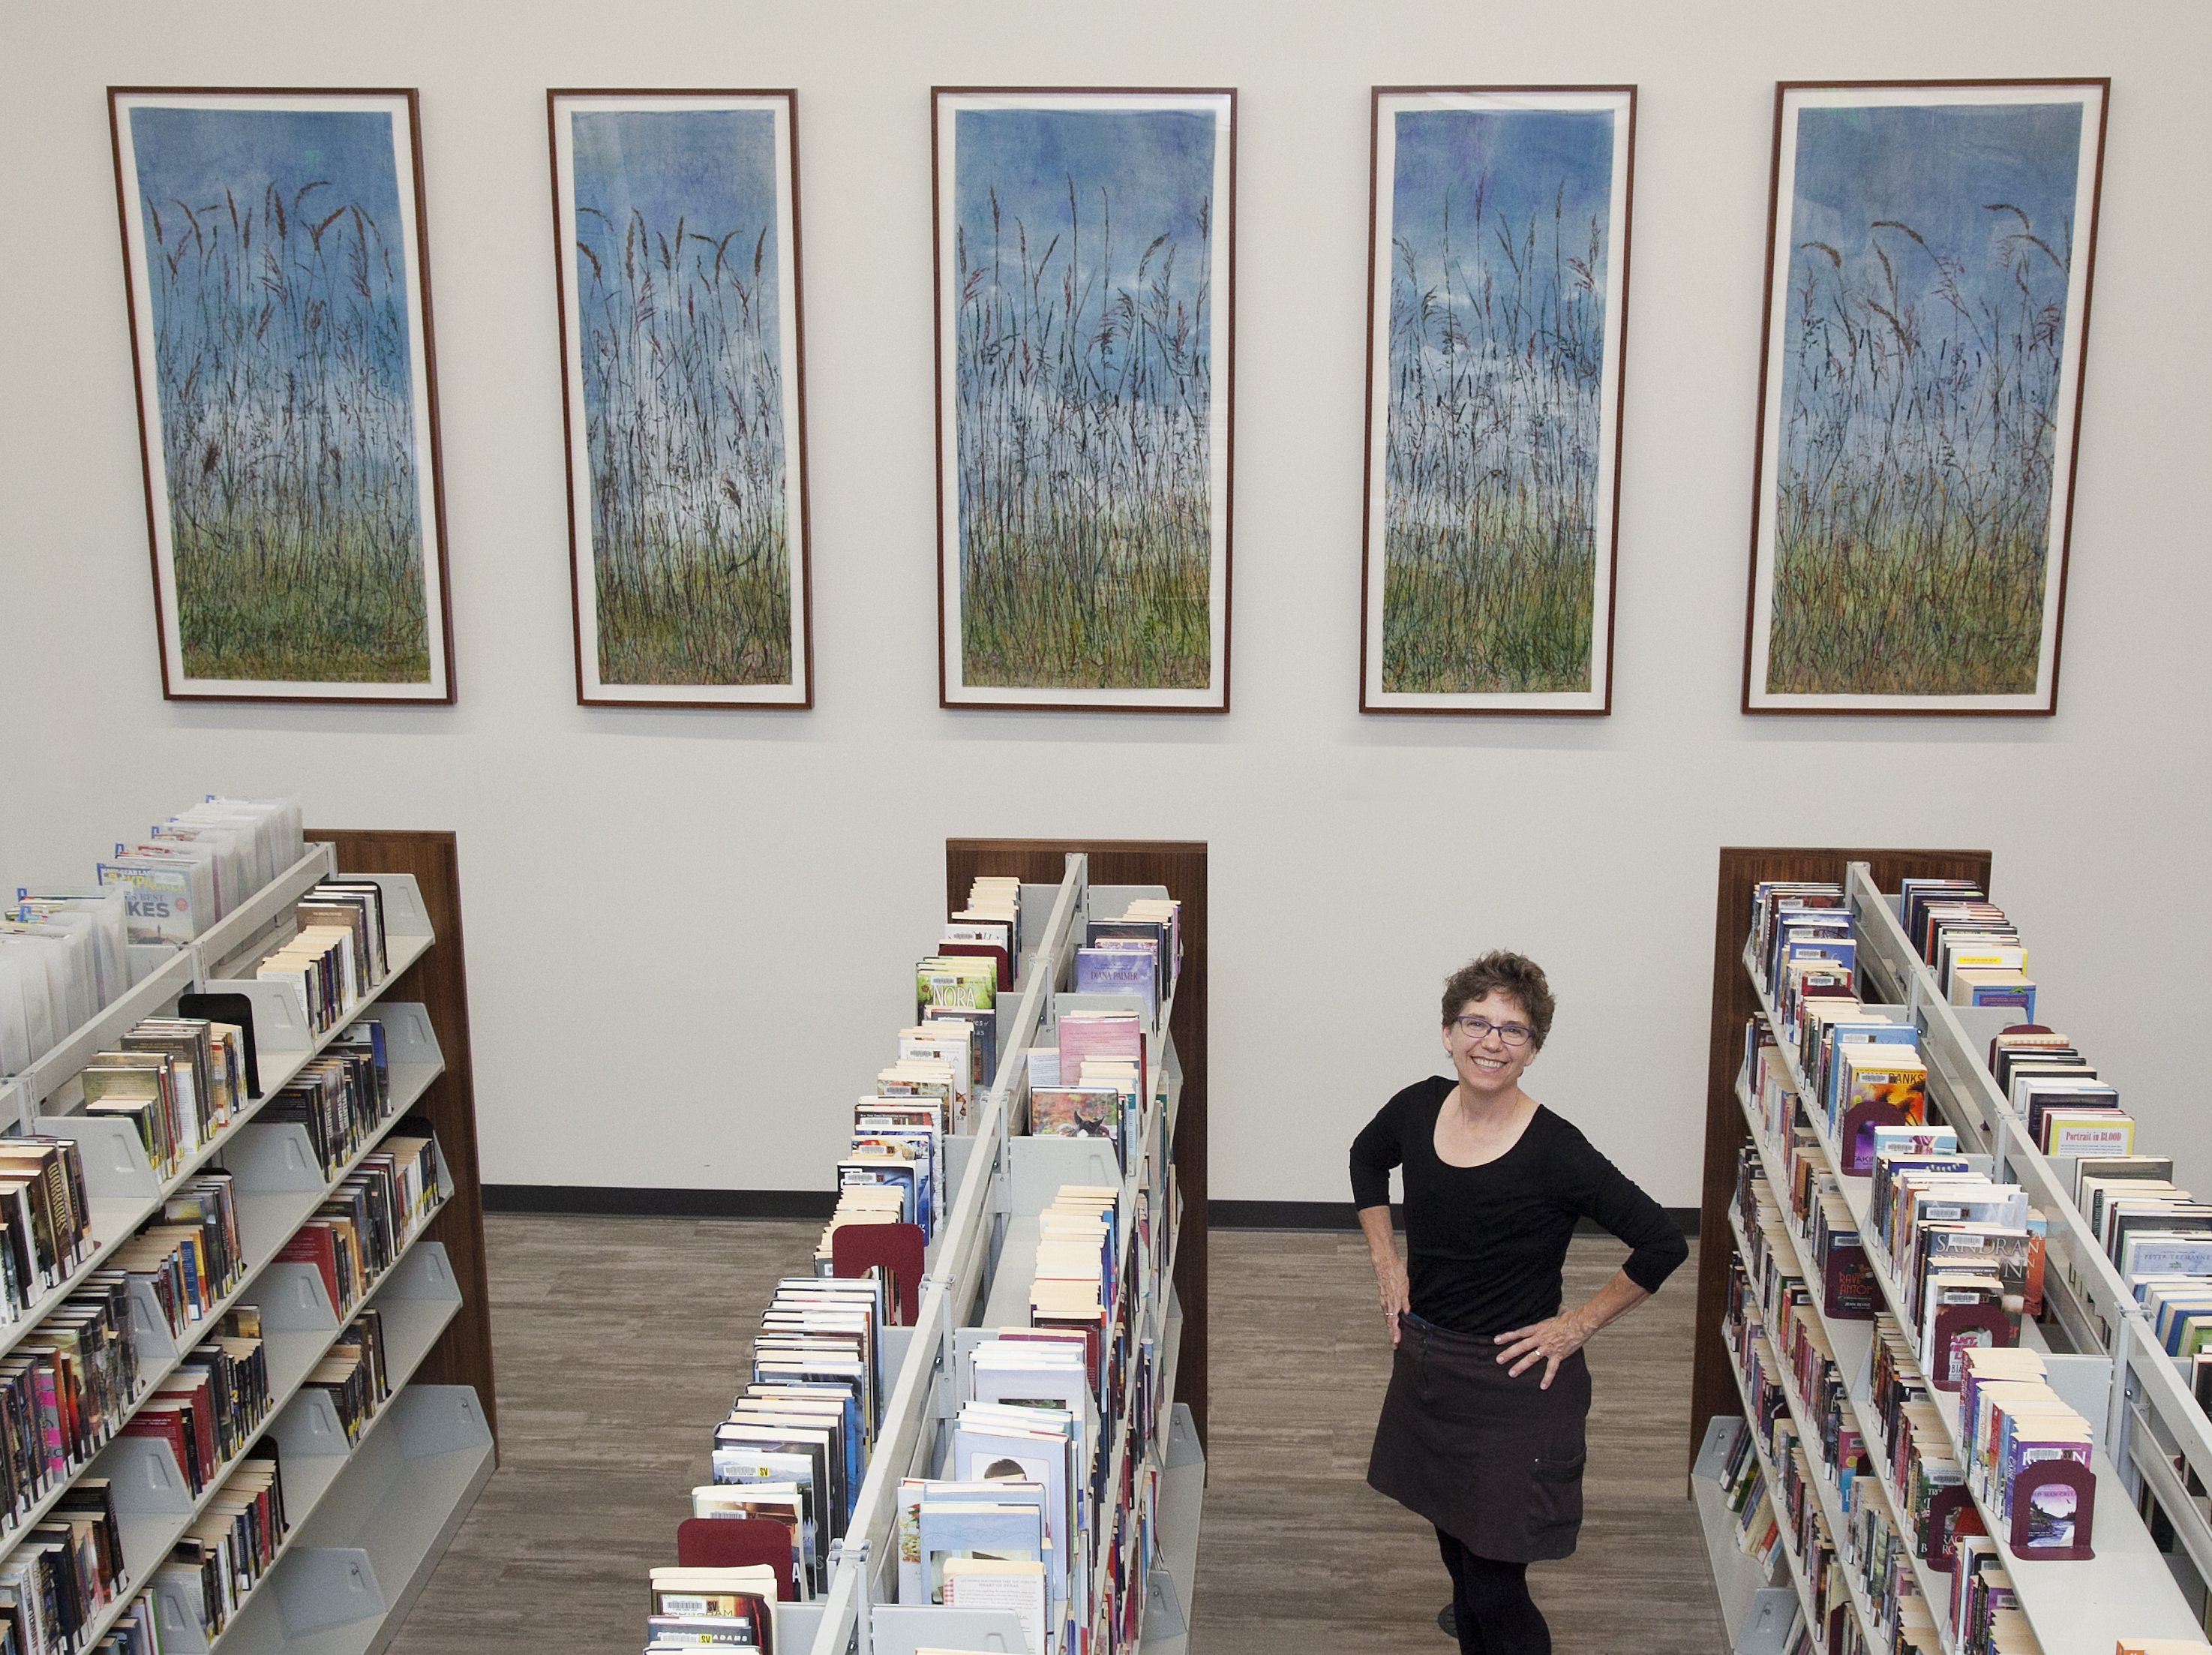 Snouffer with her installation, titled *Grass Lake* (botanical printmaking on pigment-infused tissue paper, 2017) at the Shoreview Branch Library in Shoreview, MN. It is her largest piece yet, and is named for a nearby prairie